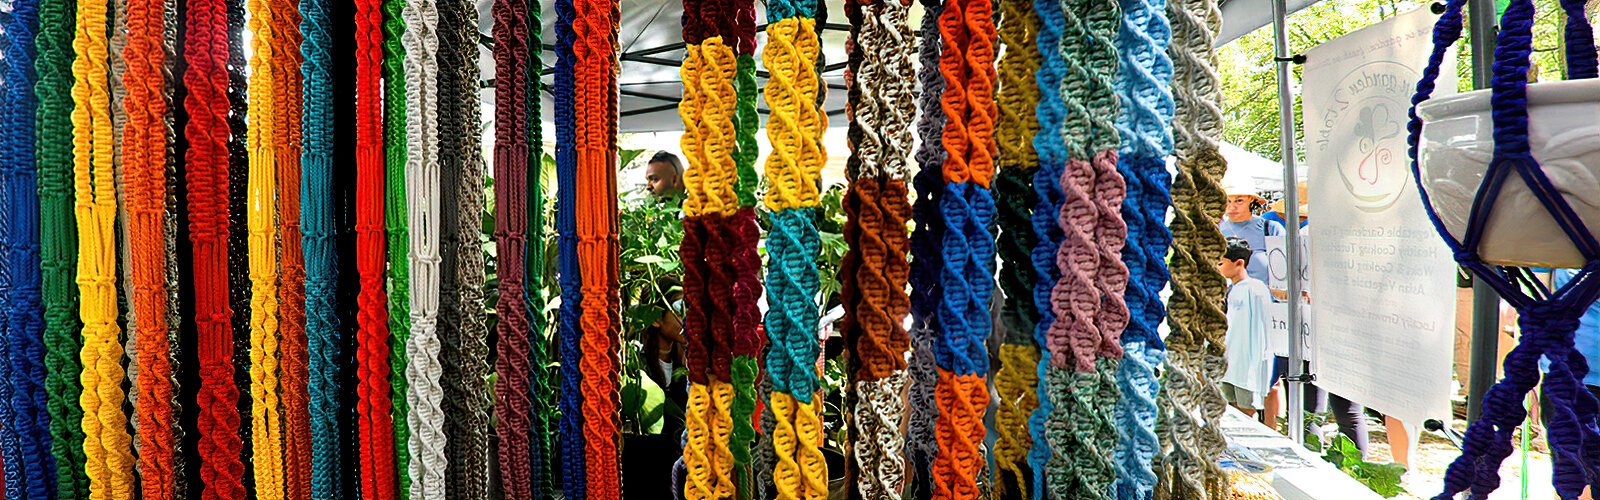 Some colorful handcrafted vintage-style macrame hangers made by Knotty Nanna.